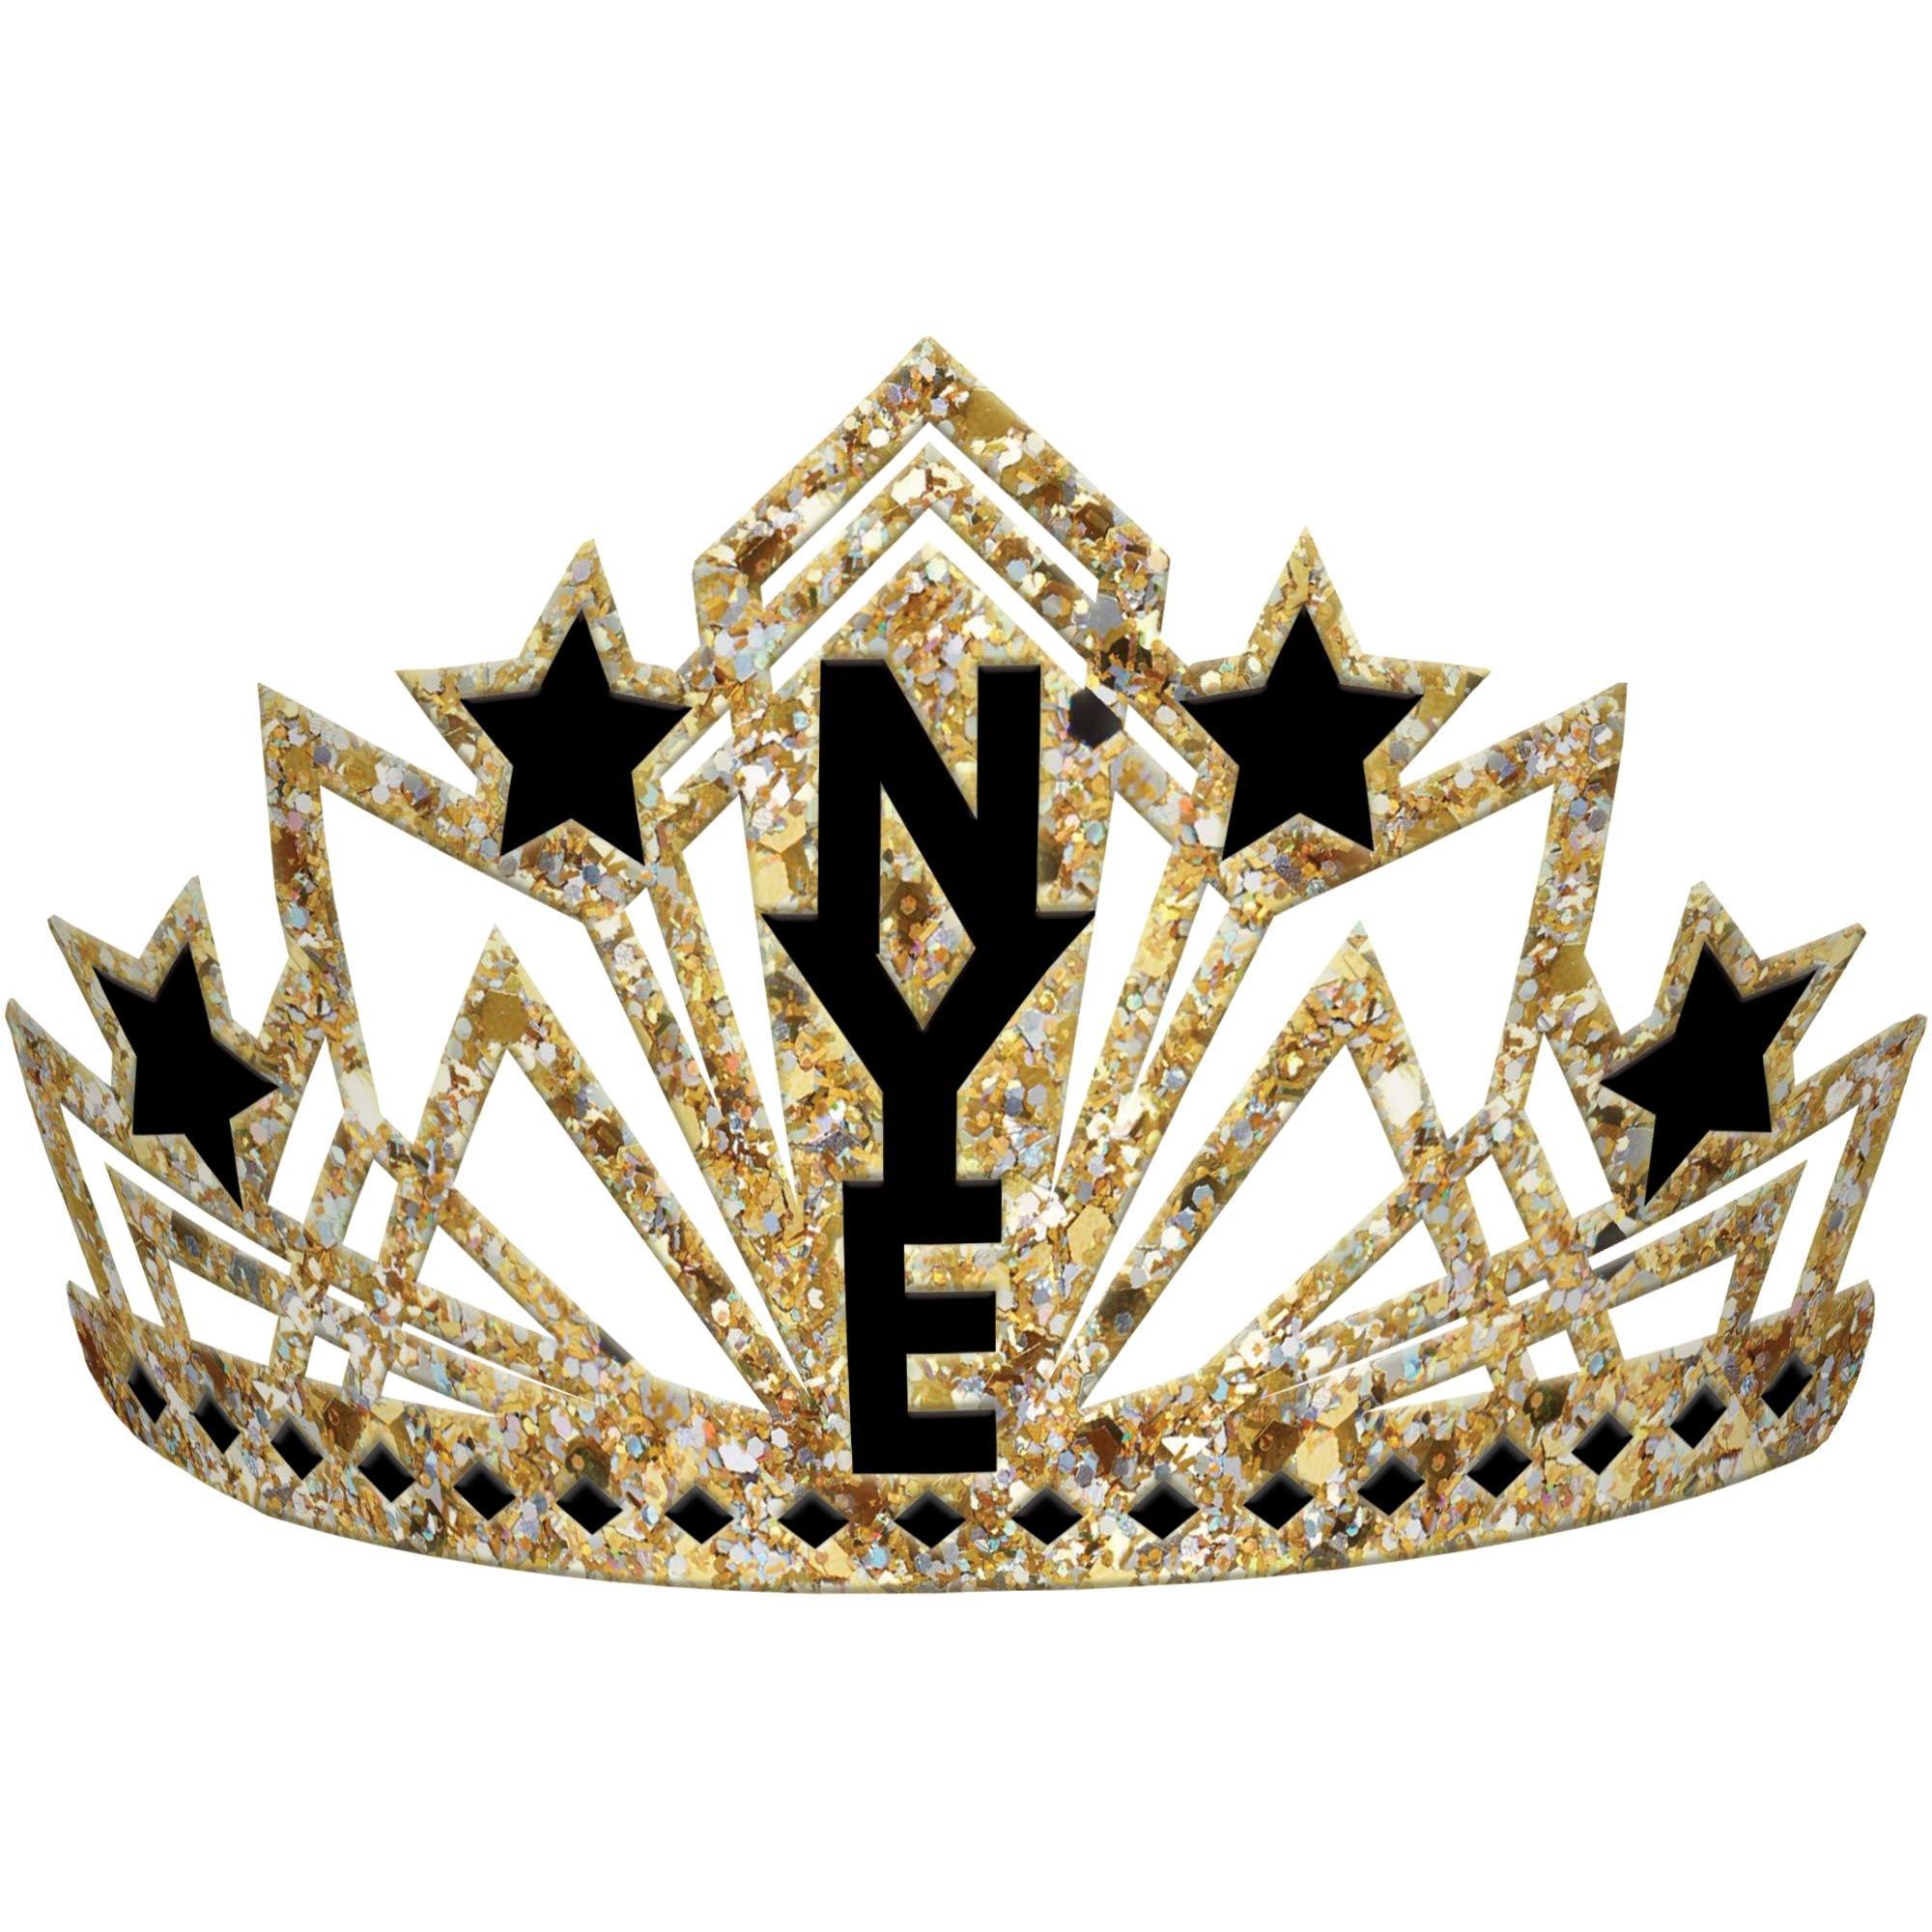 How to Make a Glittery Foil Kids Crown for New Year's Eve